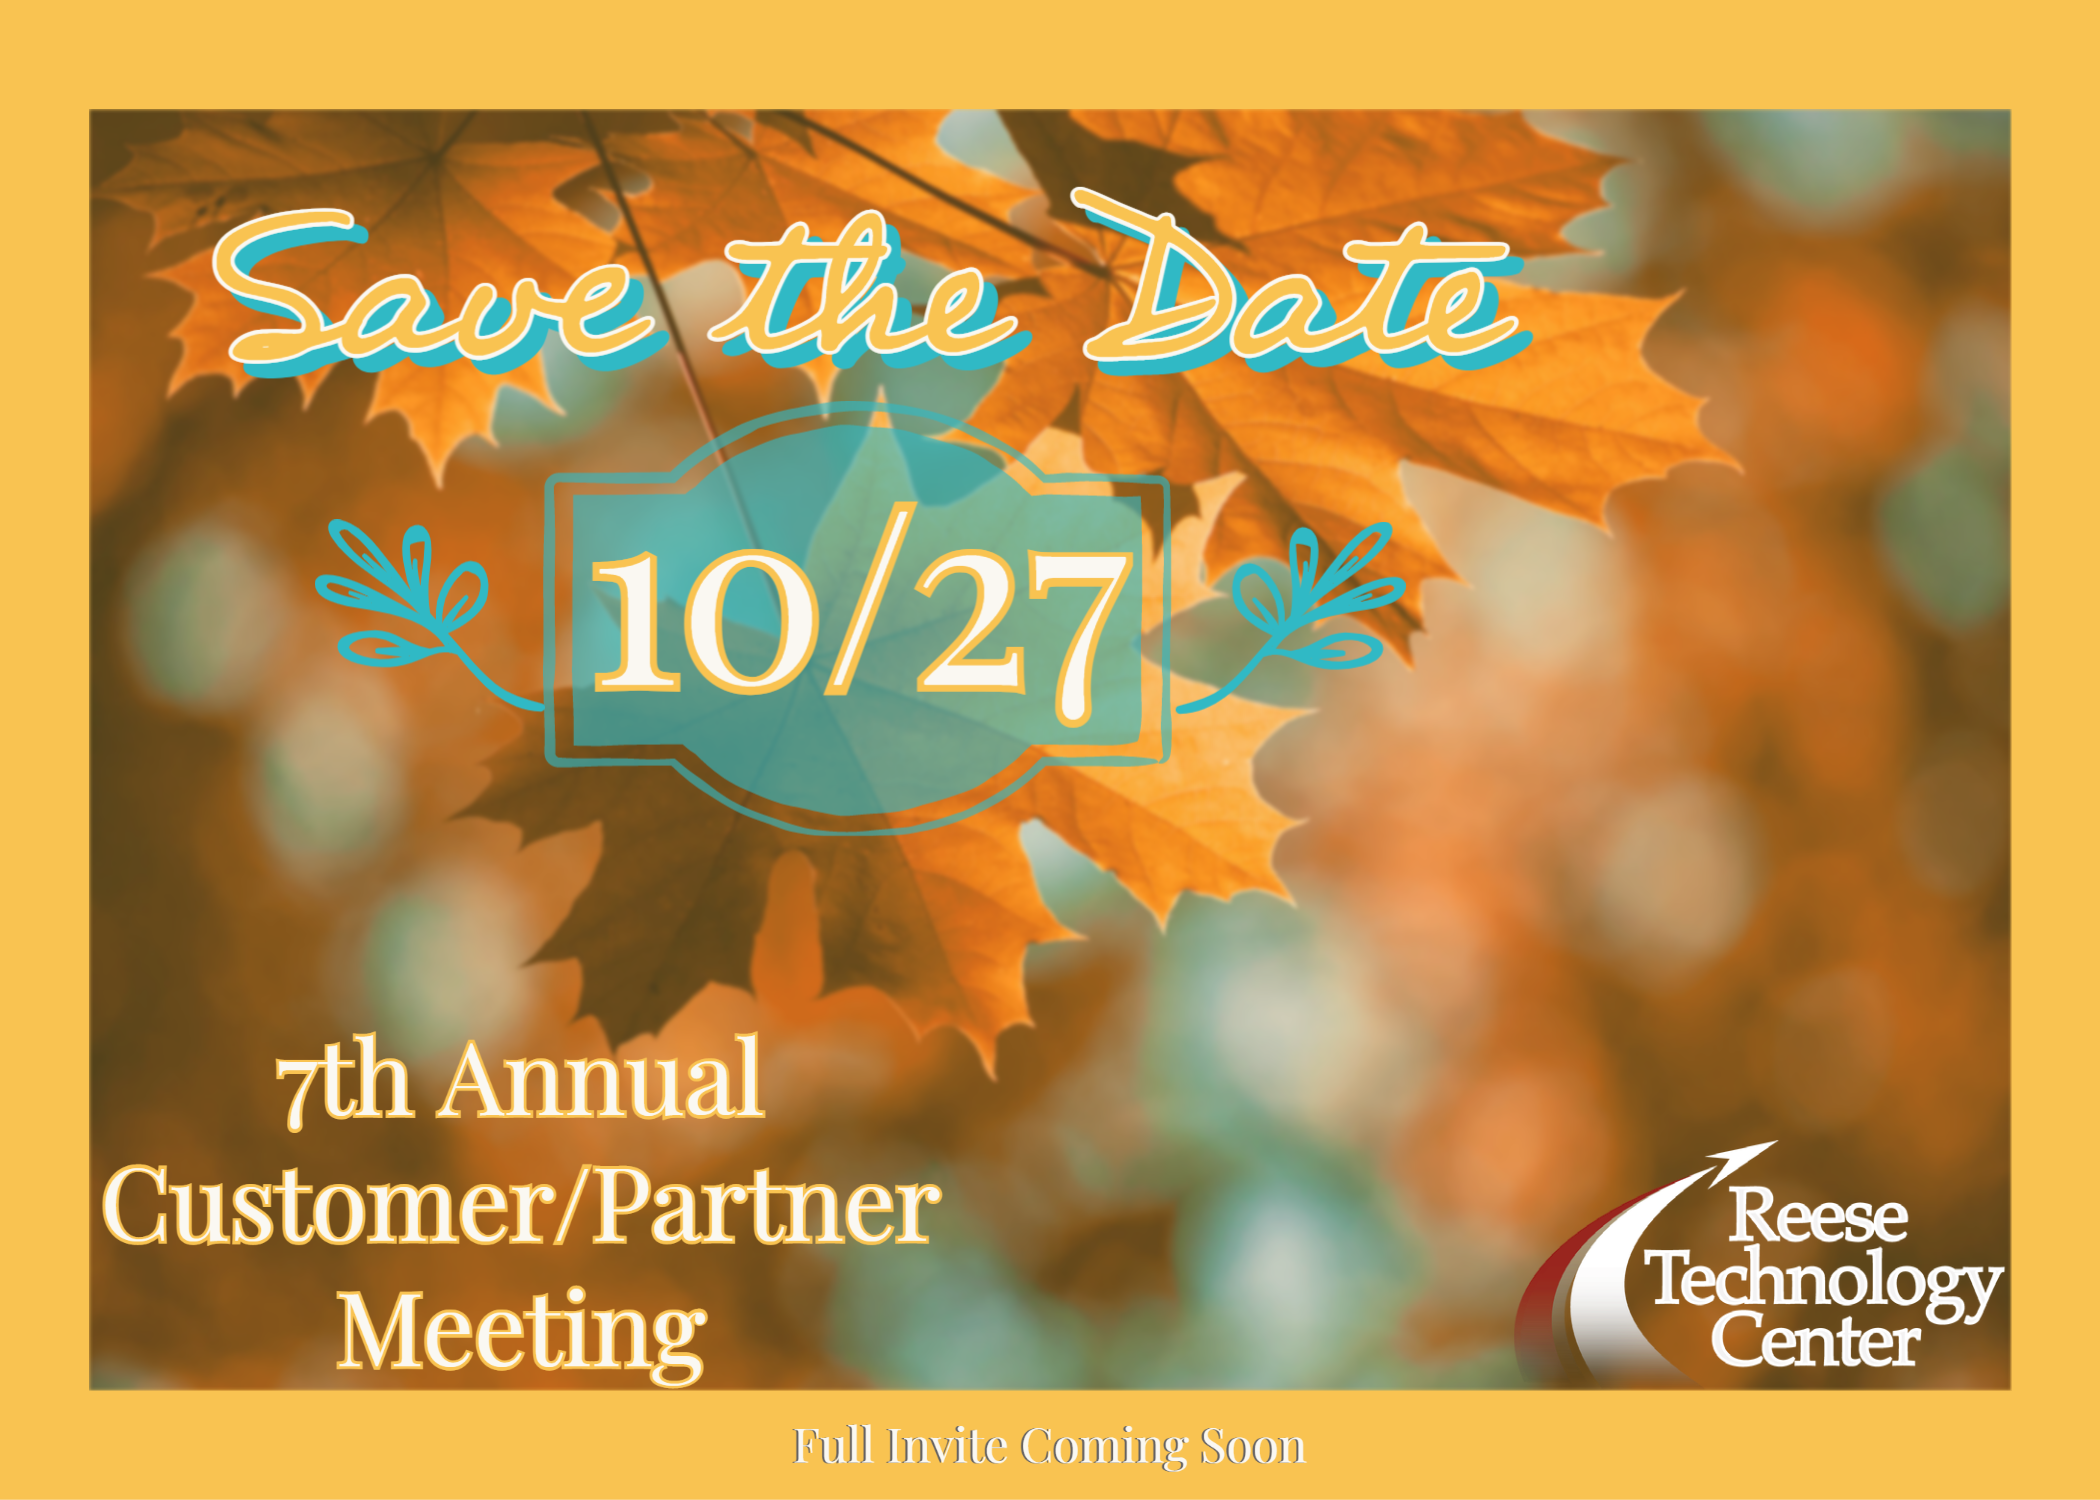 Save the Date Meeting Announcement